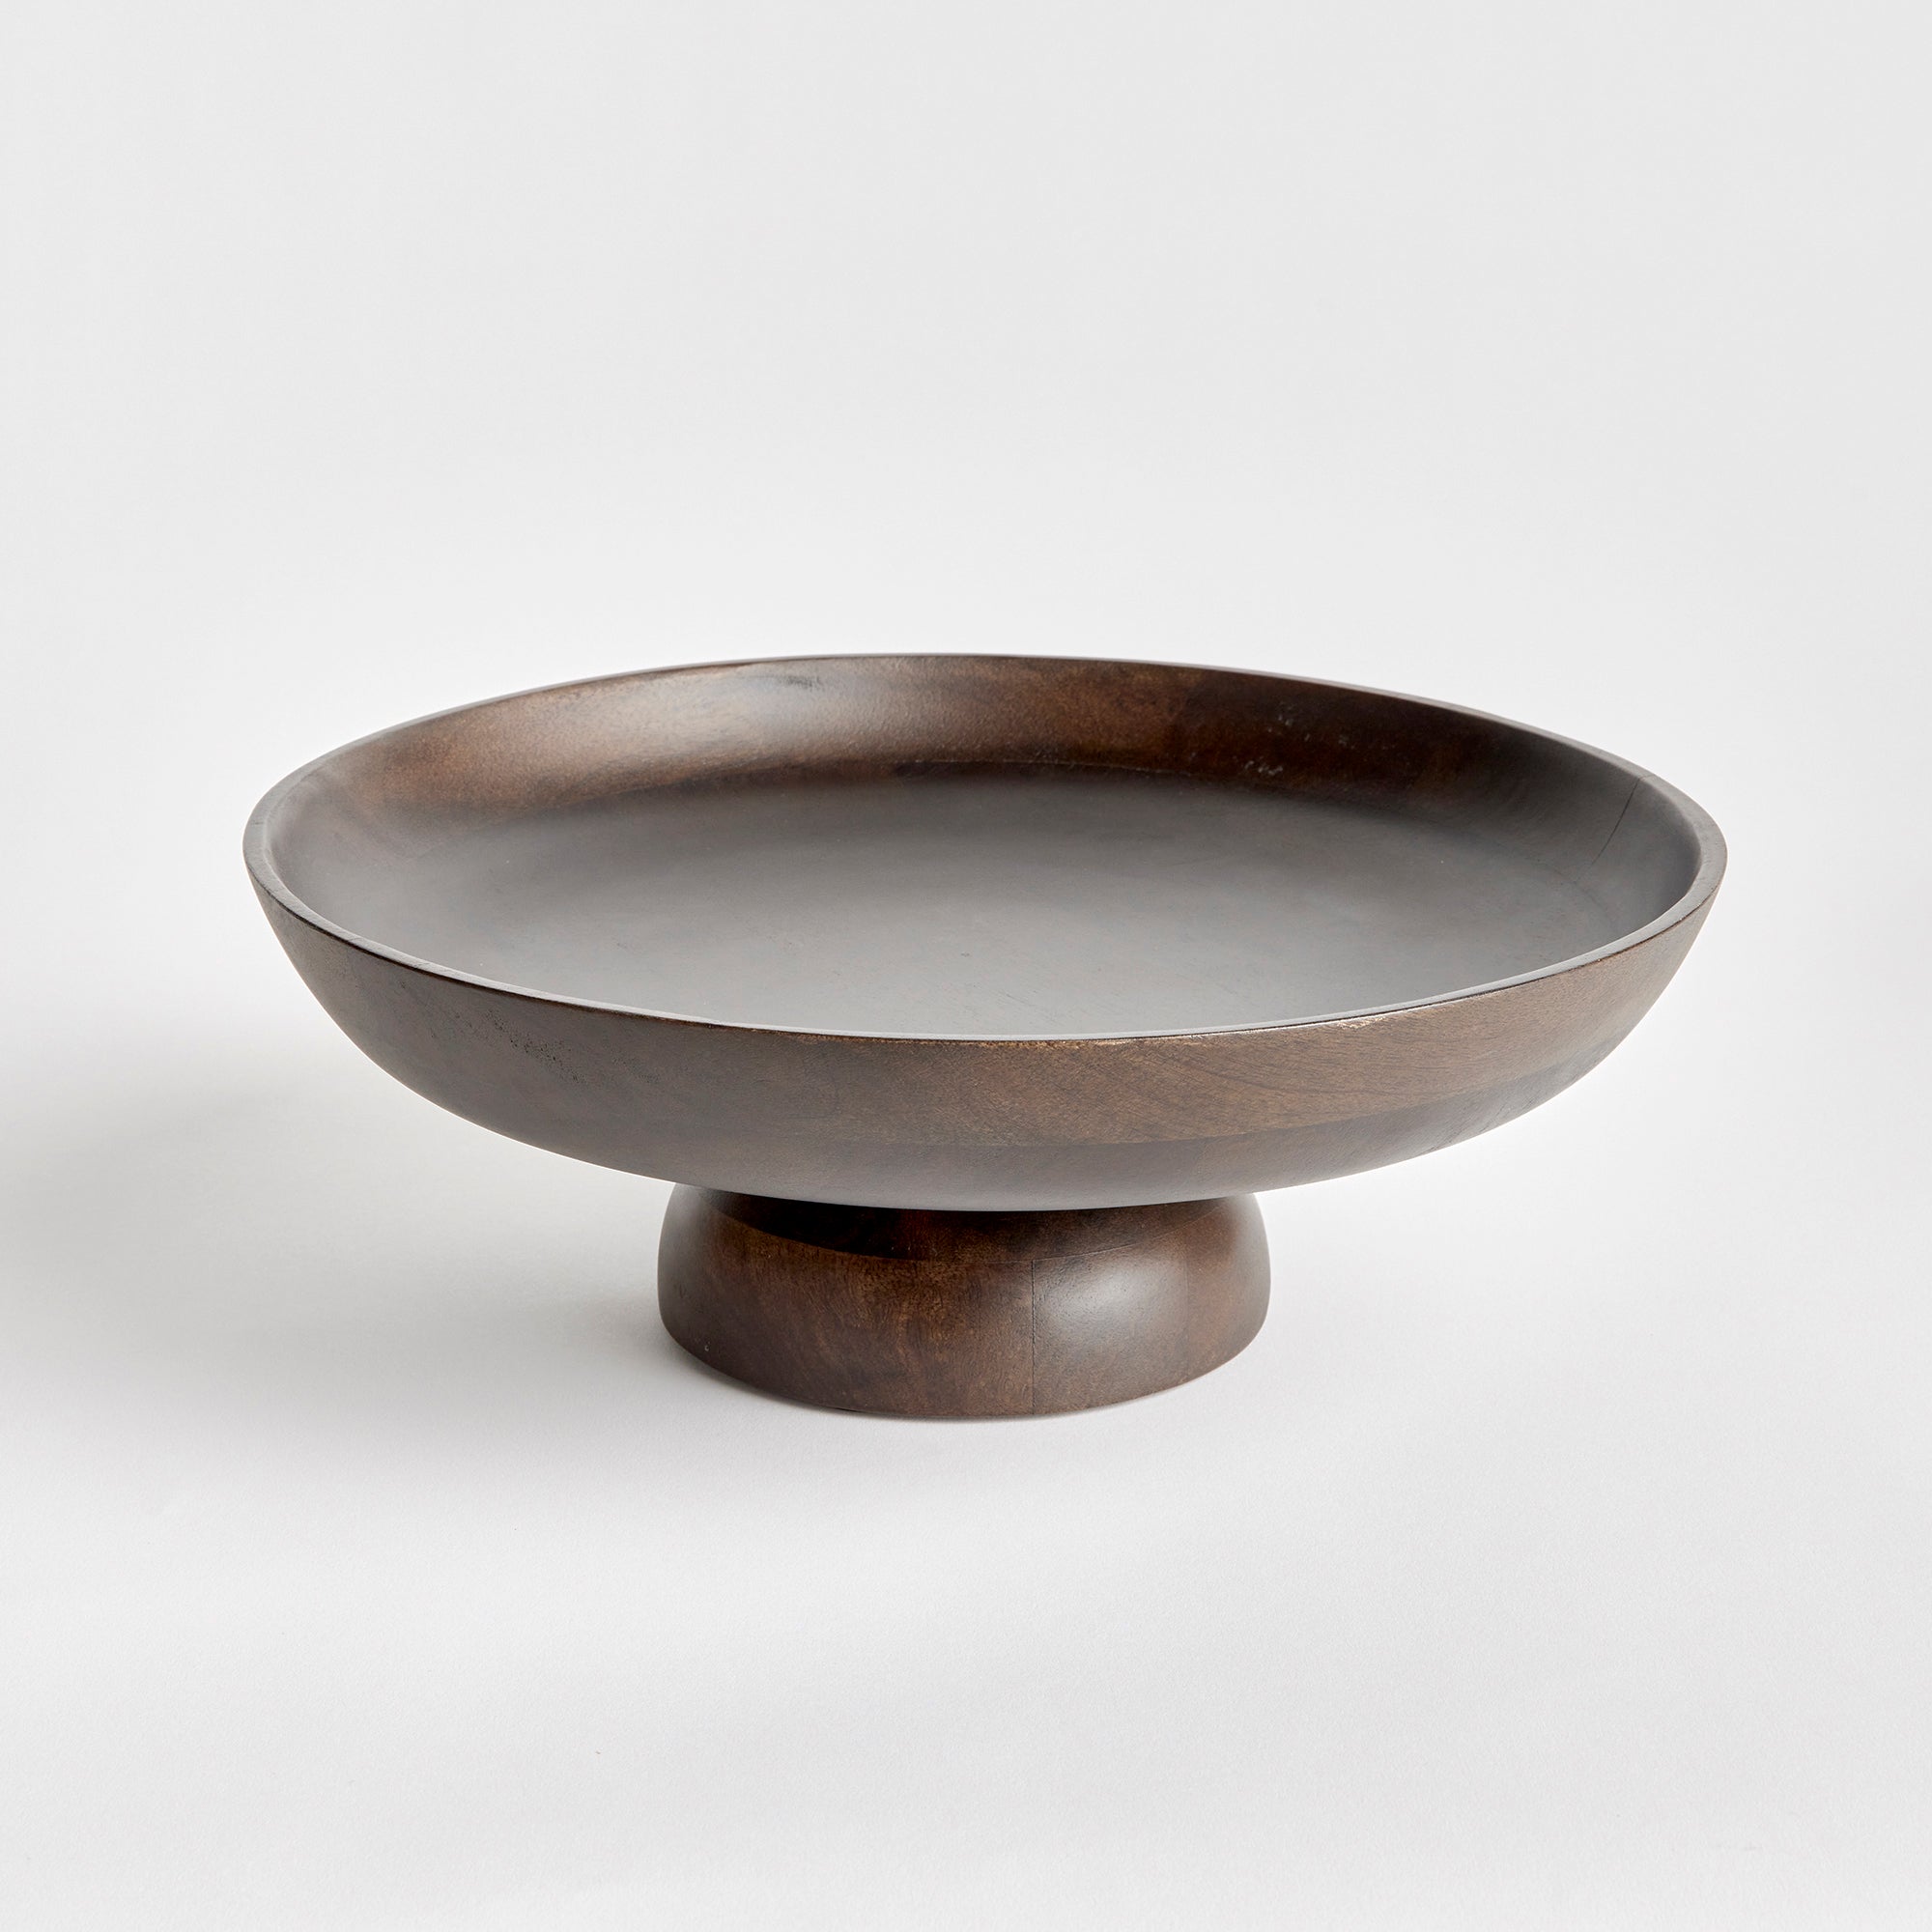 Contemporary and uniquely designed, this footed bowl is made of mango wood. Makes a beautiful serving bowl for dry foods, as well as a gorgeous centerpiece all on its own. Amethyst Home provides interior design, new construction, custom furniture, and area rugs in the Portland metro area.